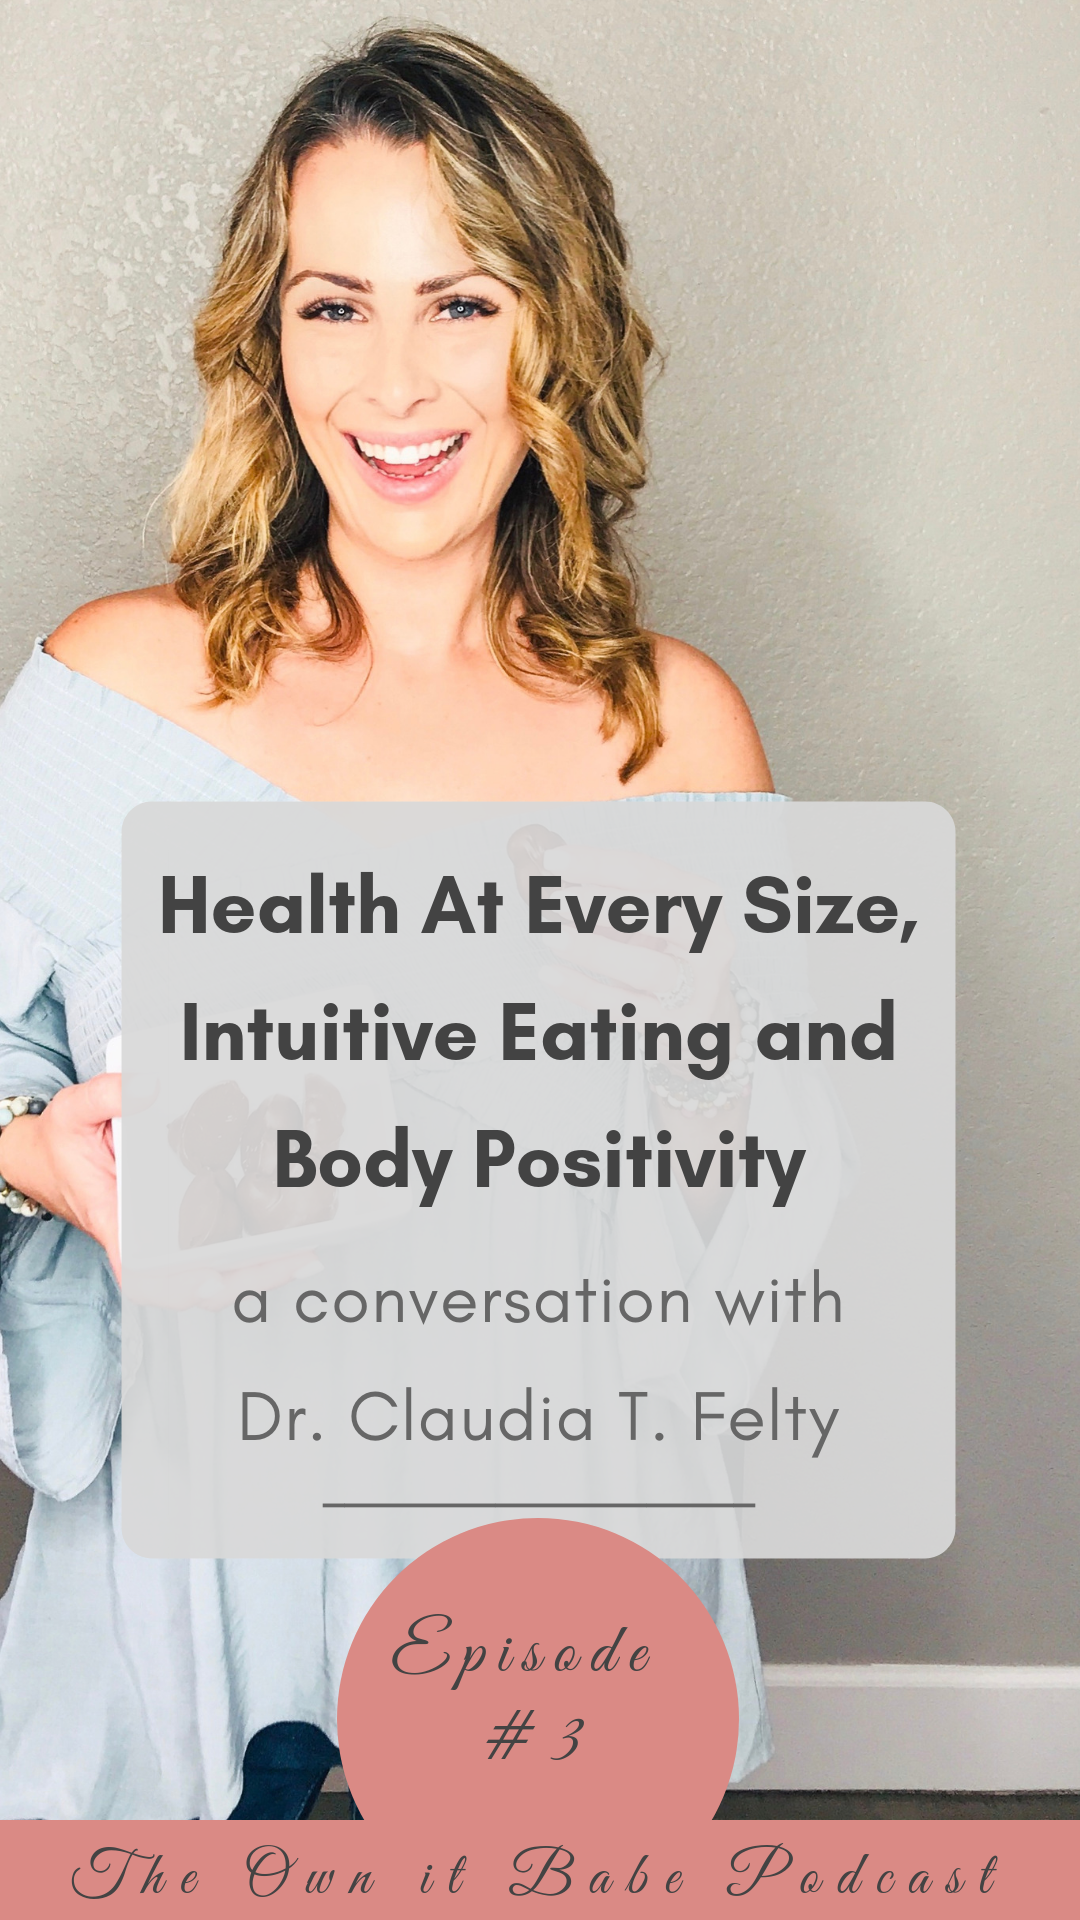 Why the goal of weight loss can be harmful rather than helpful, with Dr. Claudia Felty. A chat about chronic dieting, intuitive eating, Health At Every Size, Body Positivity and healing bad body image